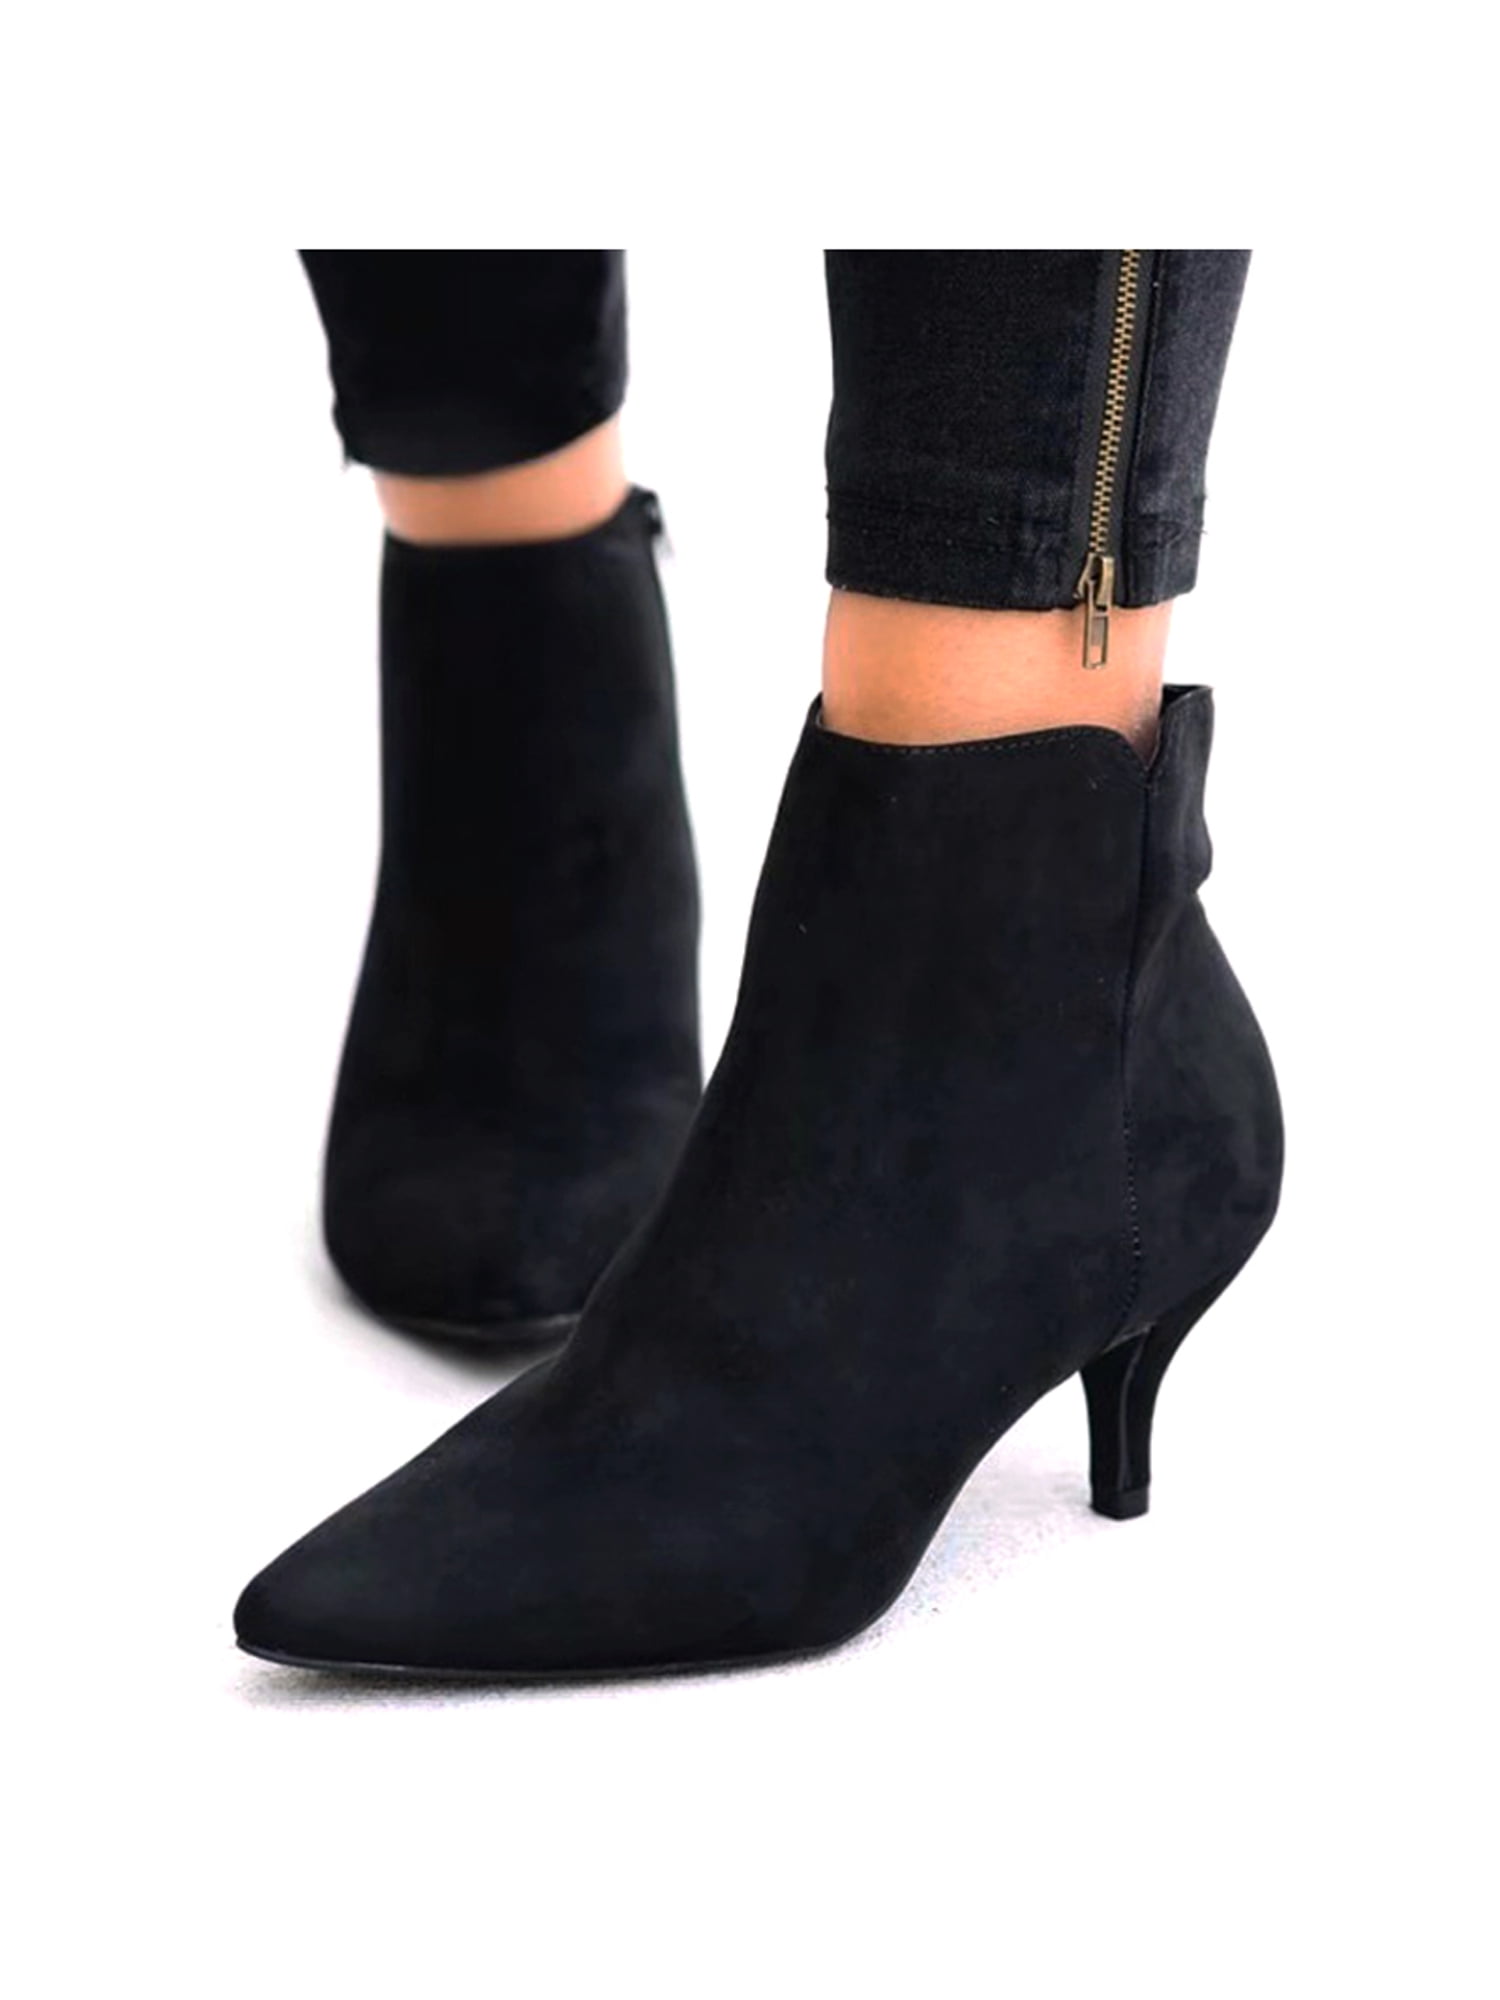 Women Ankle Boots Chelsea Low Heels Pointed Toe Zipper Booties Faux Leather Size